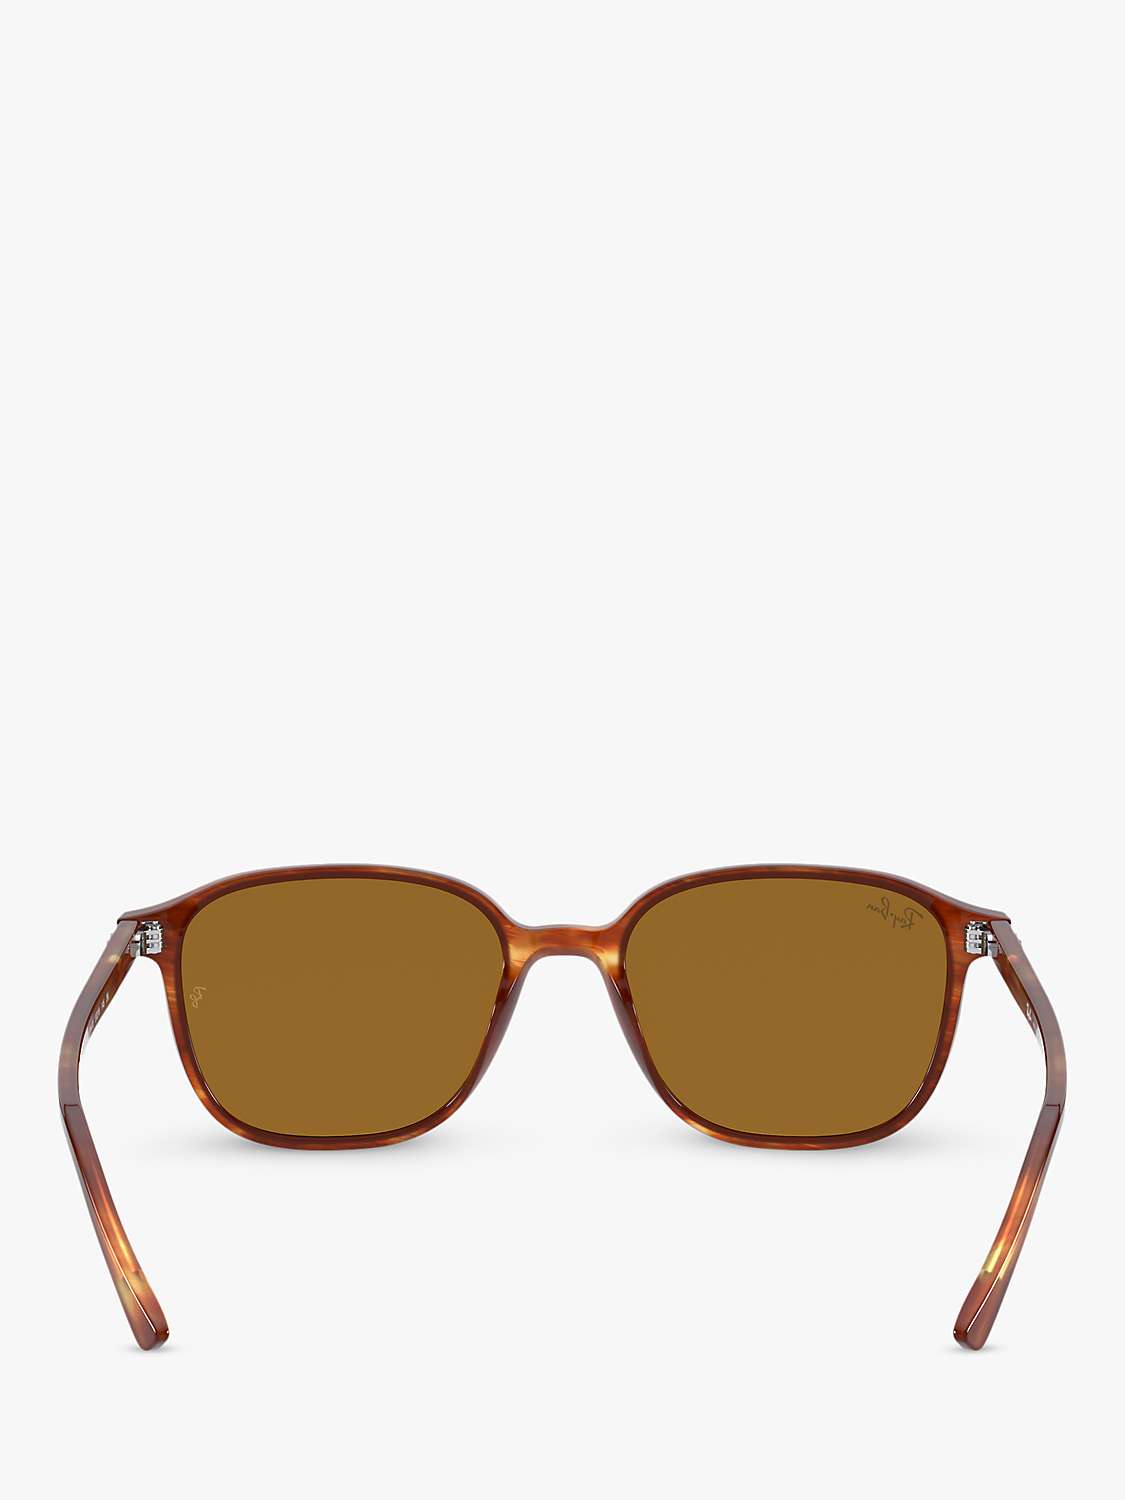 Buy Ray-Ban RB2193 Unisex Square Sunglasses, Striped Havana/Brown Online at johnlewis.com